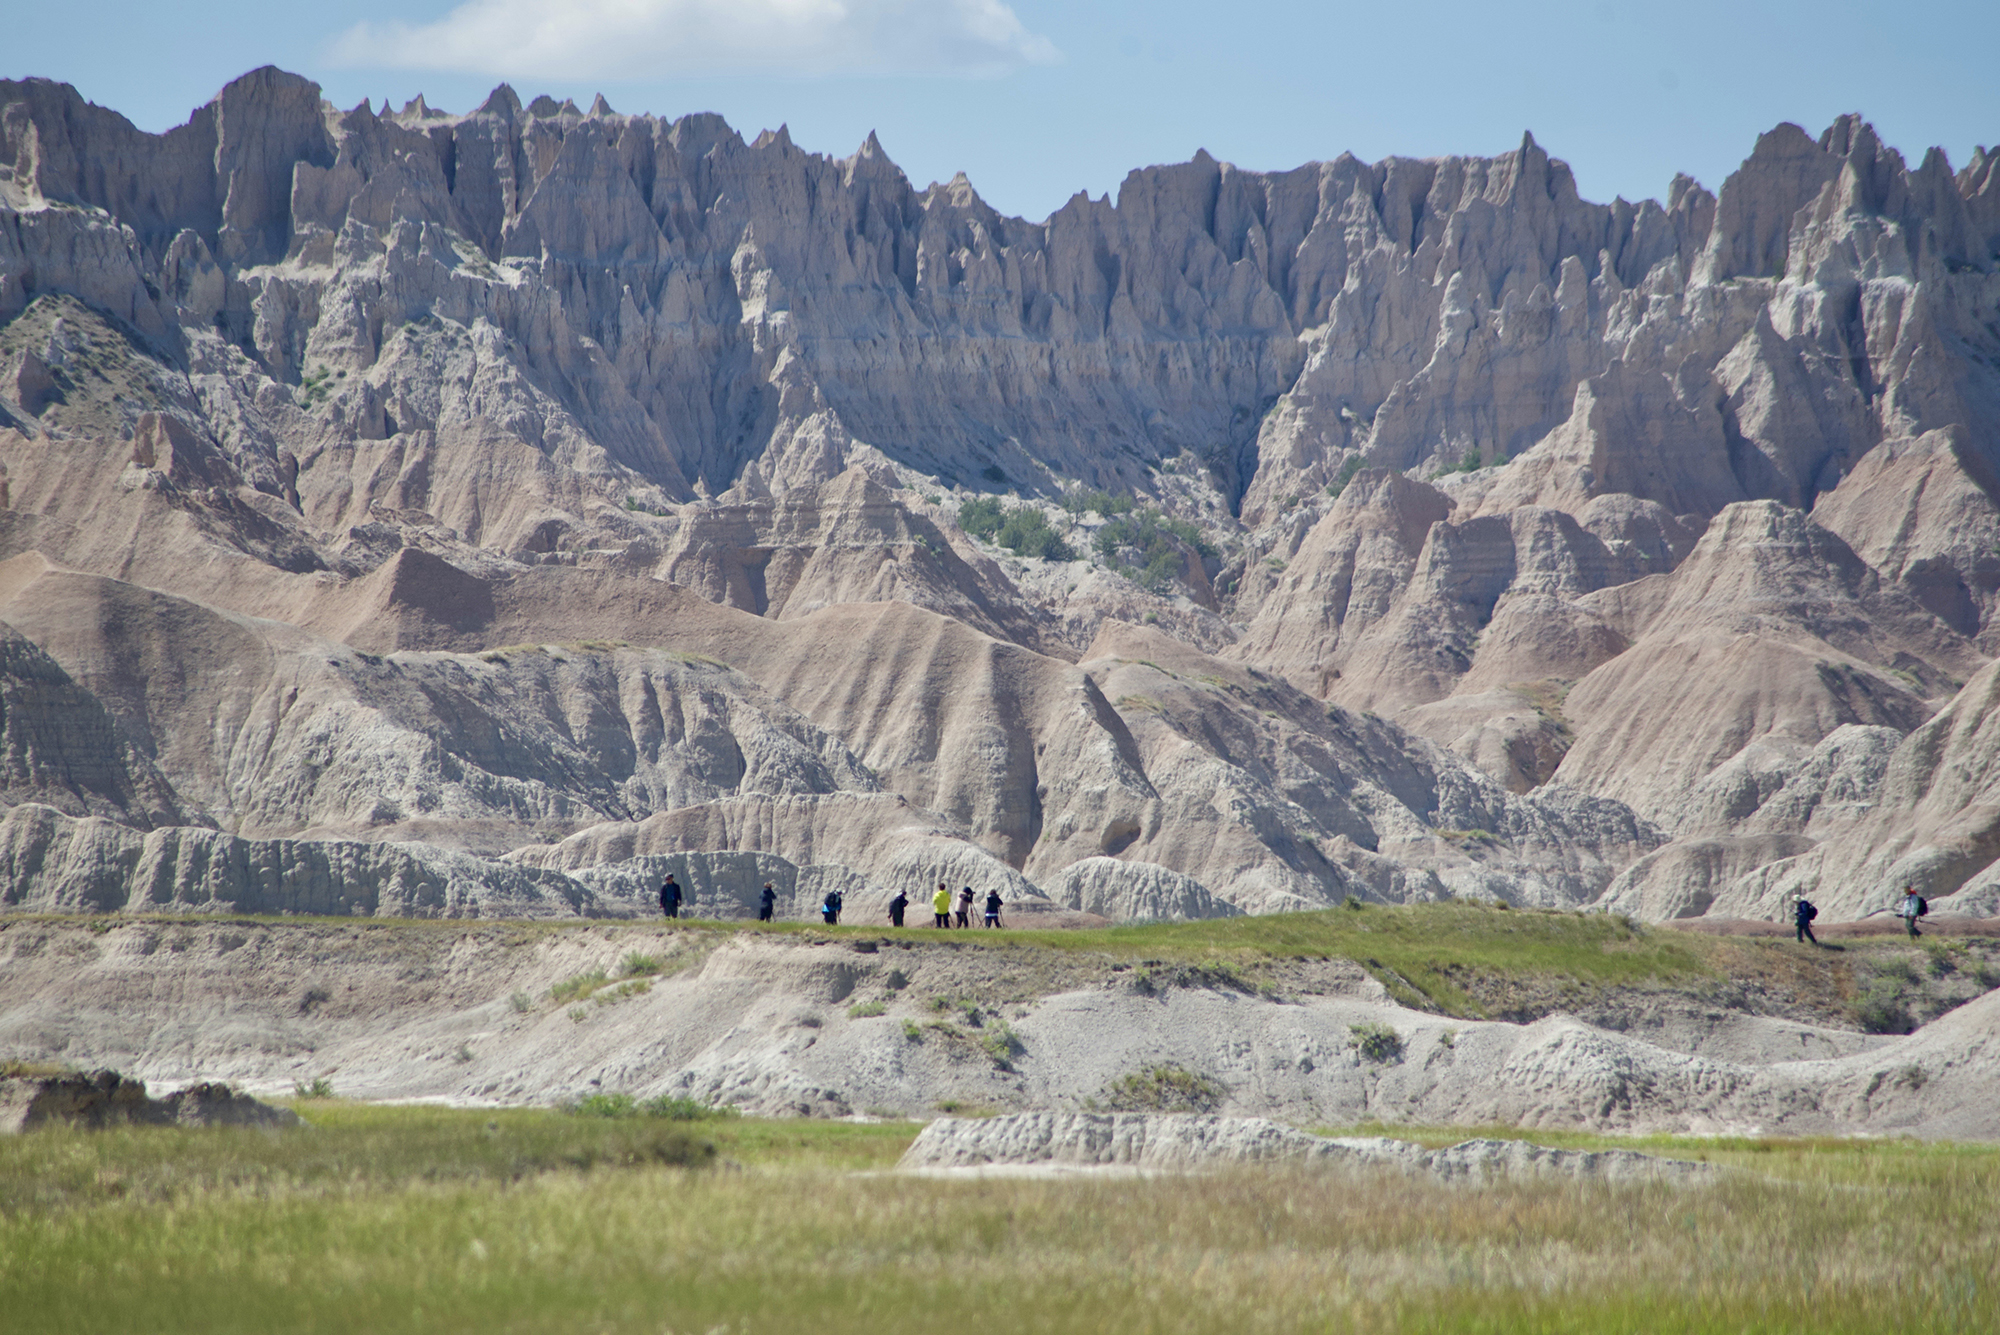 Hikers are dwarfed by Badlands that tower in the horizon.